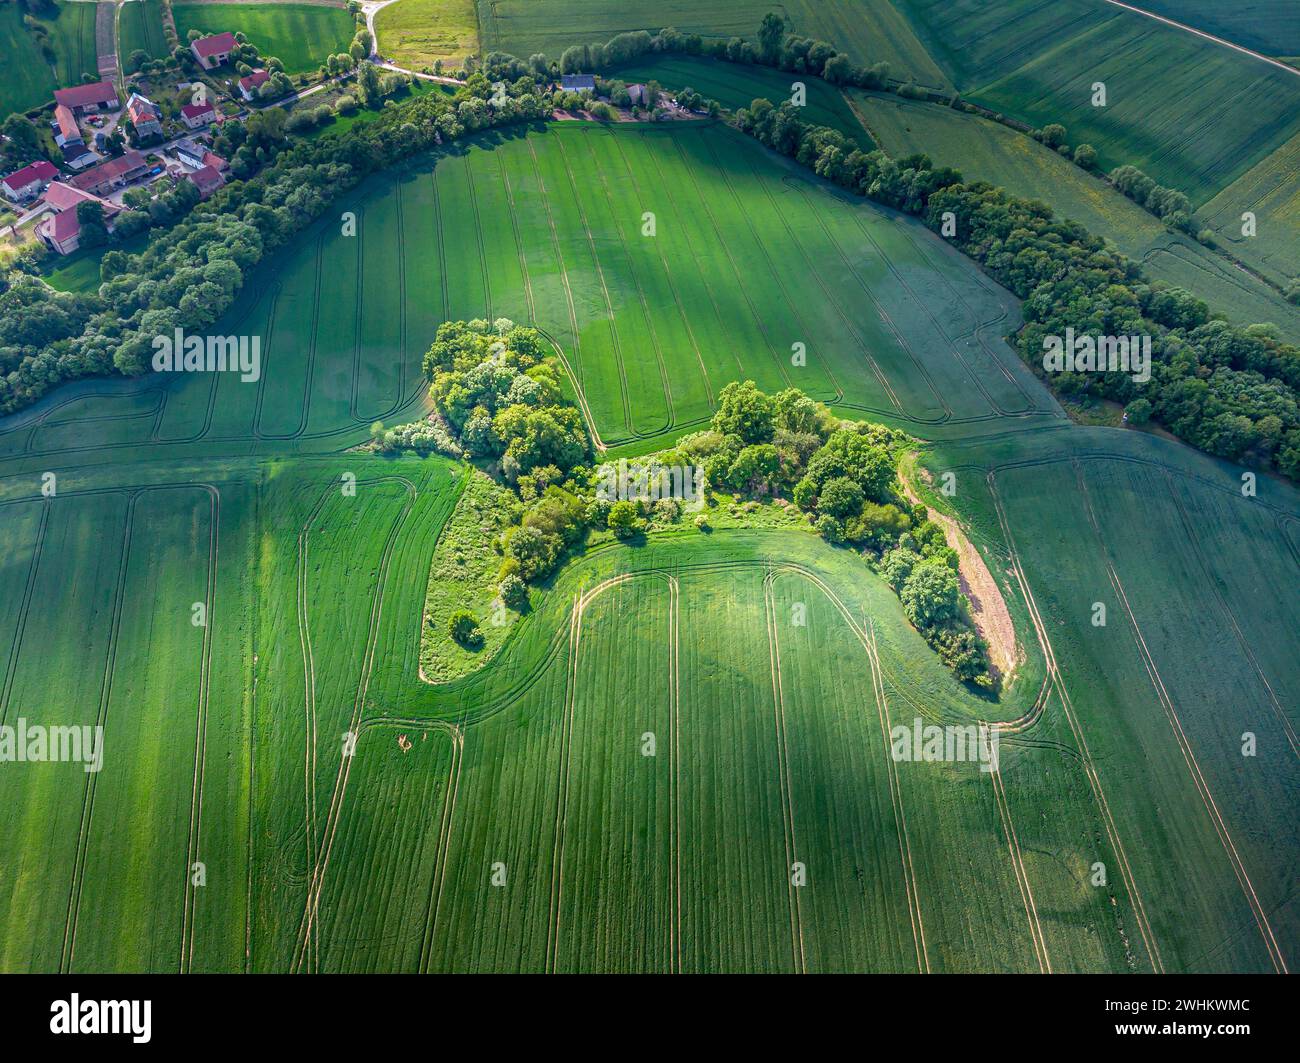 A naturally shaped grove in Poland, seen from a bird's perspective, has the shape of a poodle dog. Stock Photo